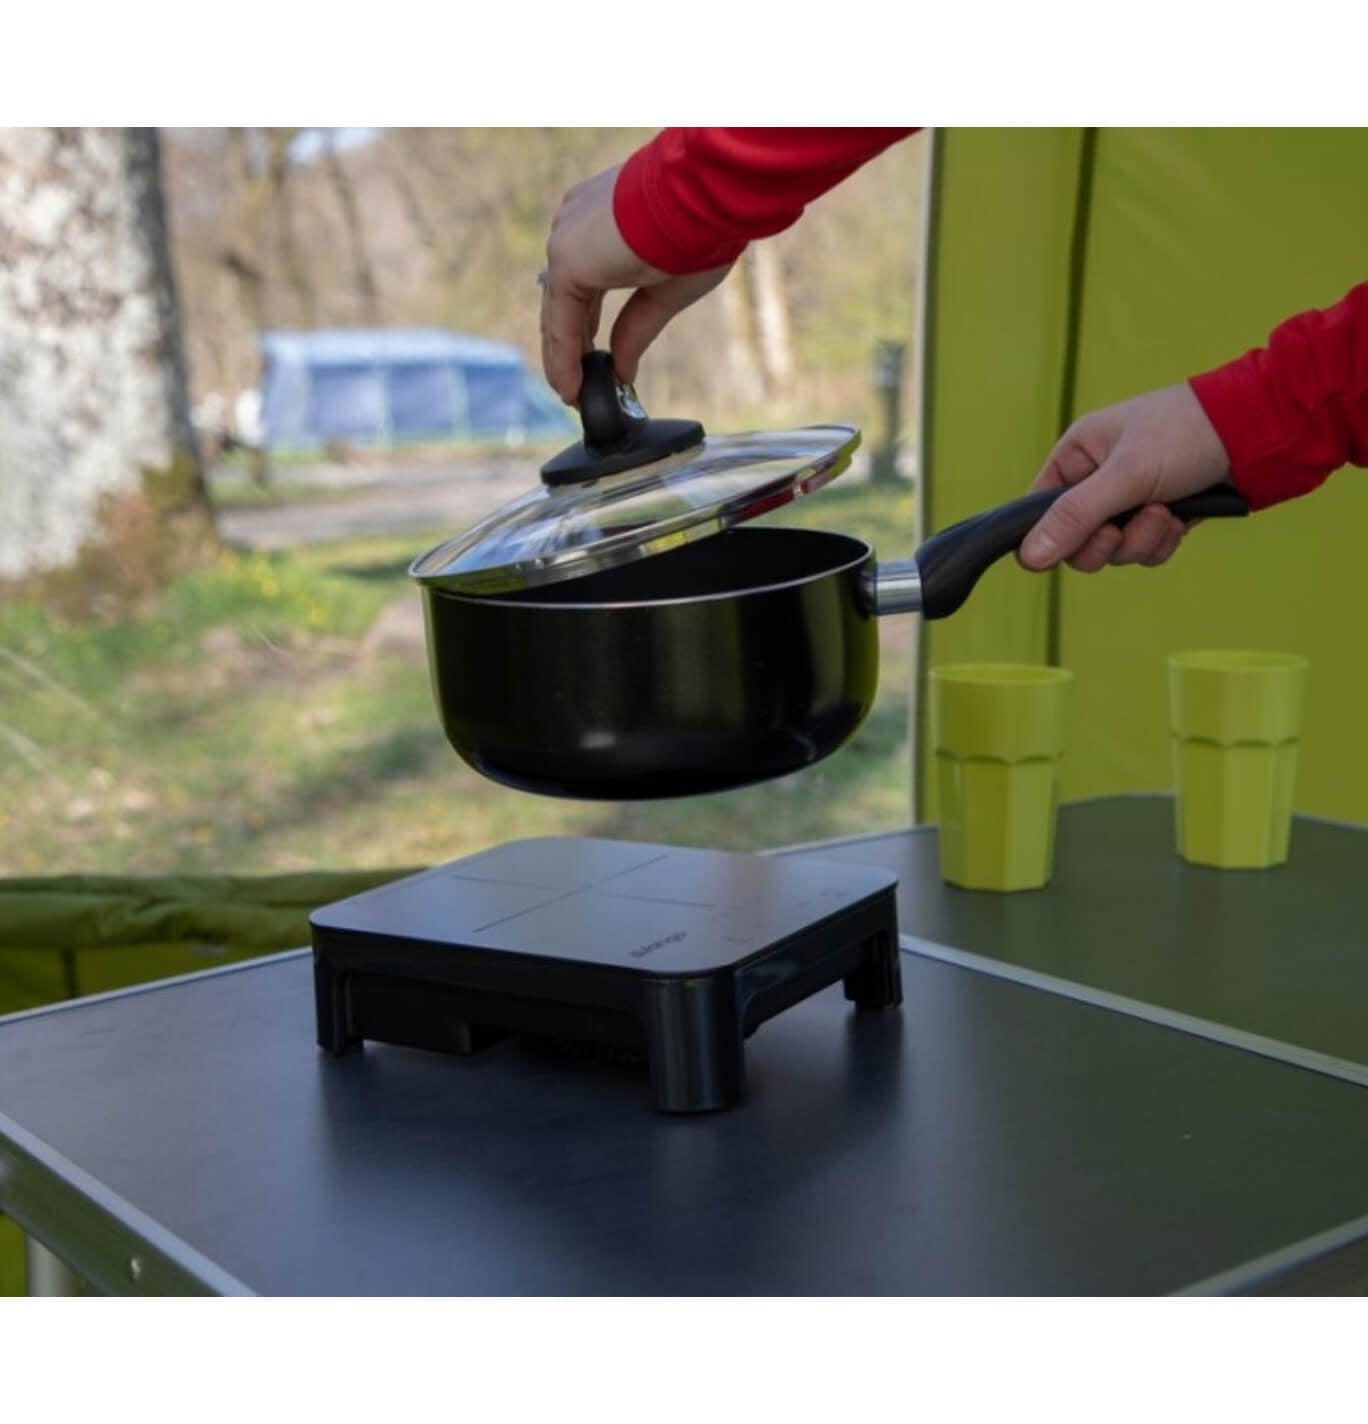 Vango Sizzle Induction Camping Cooker Hob